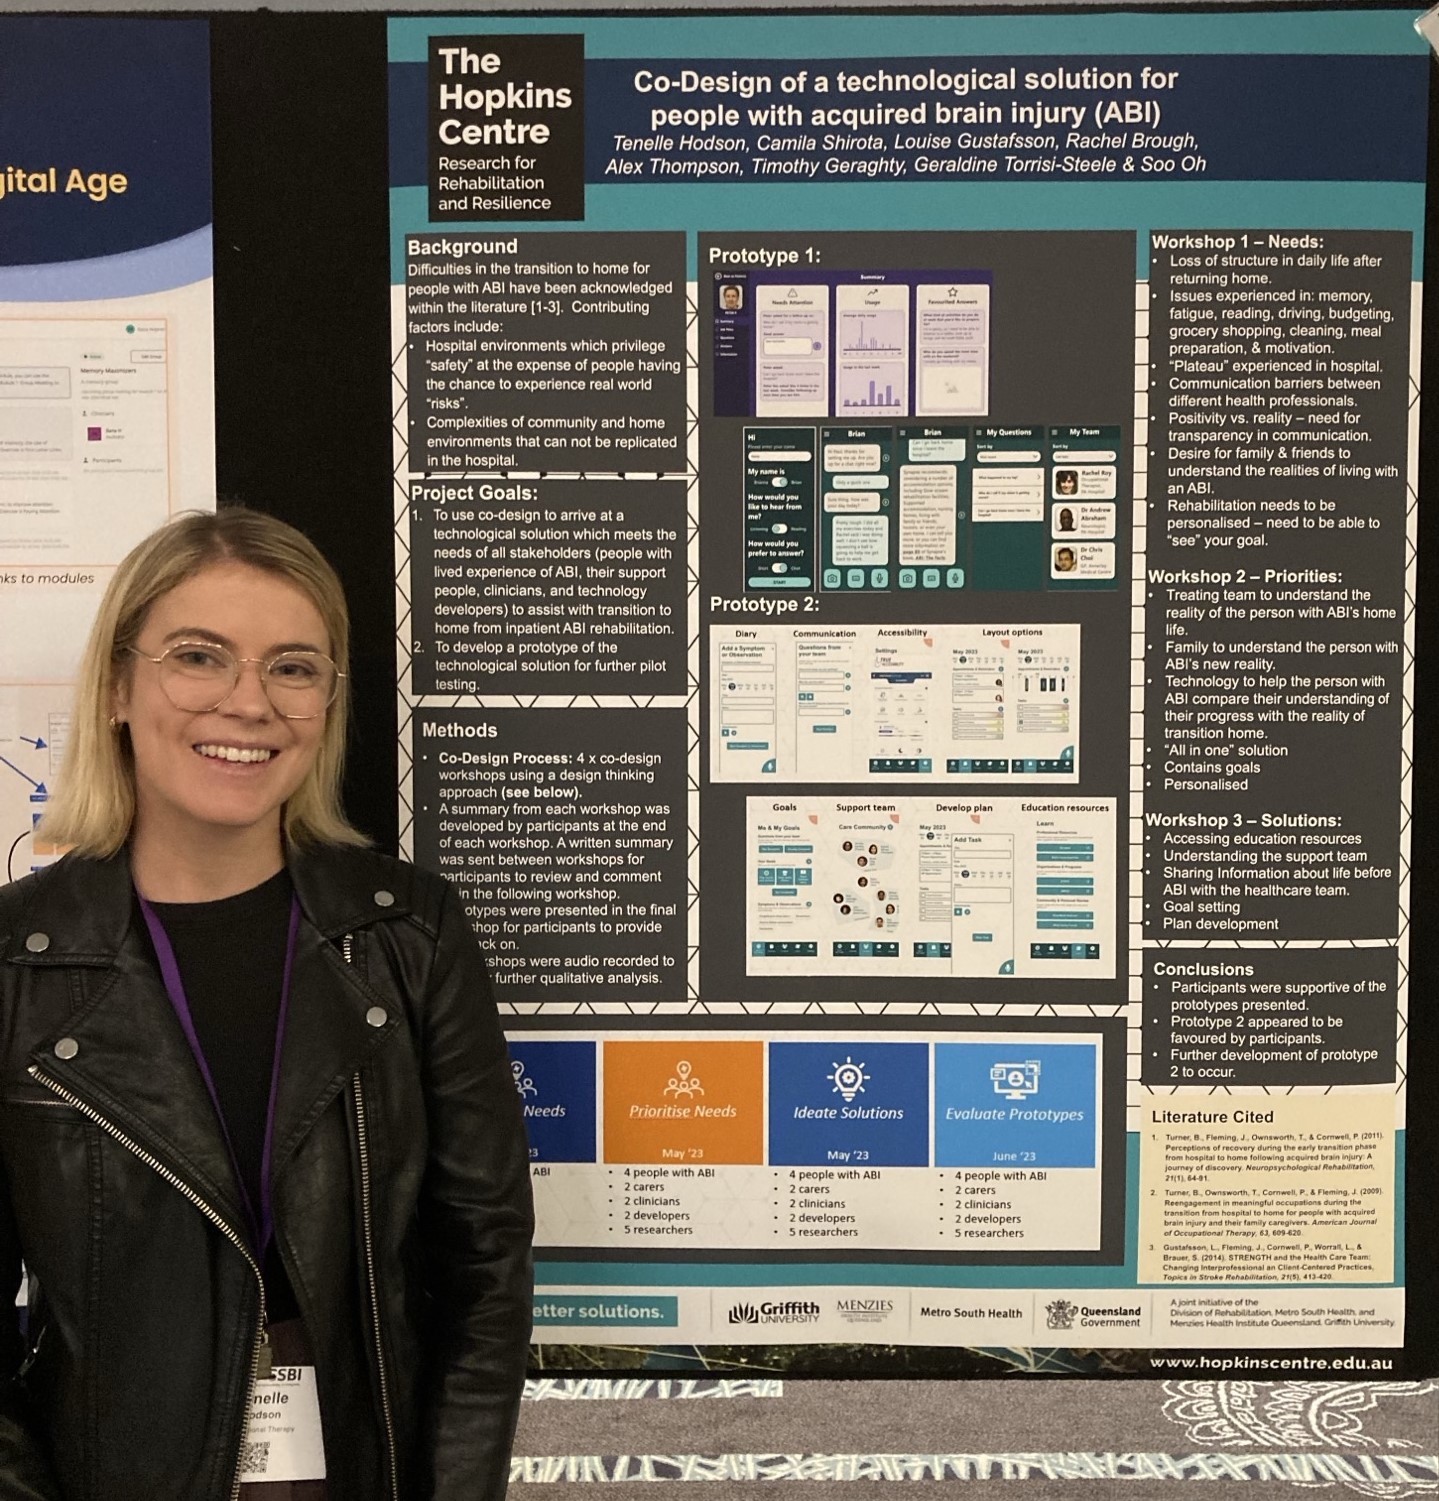 Tenelle Hodson, a woman with blonde hair and glasses wearing a black jacket, standing in front of a poster titled "Co-Design of a technological solution for people with acquired brain injury (ABI)"